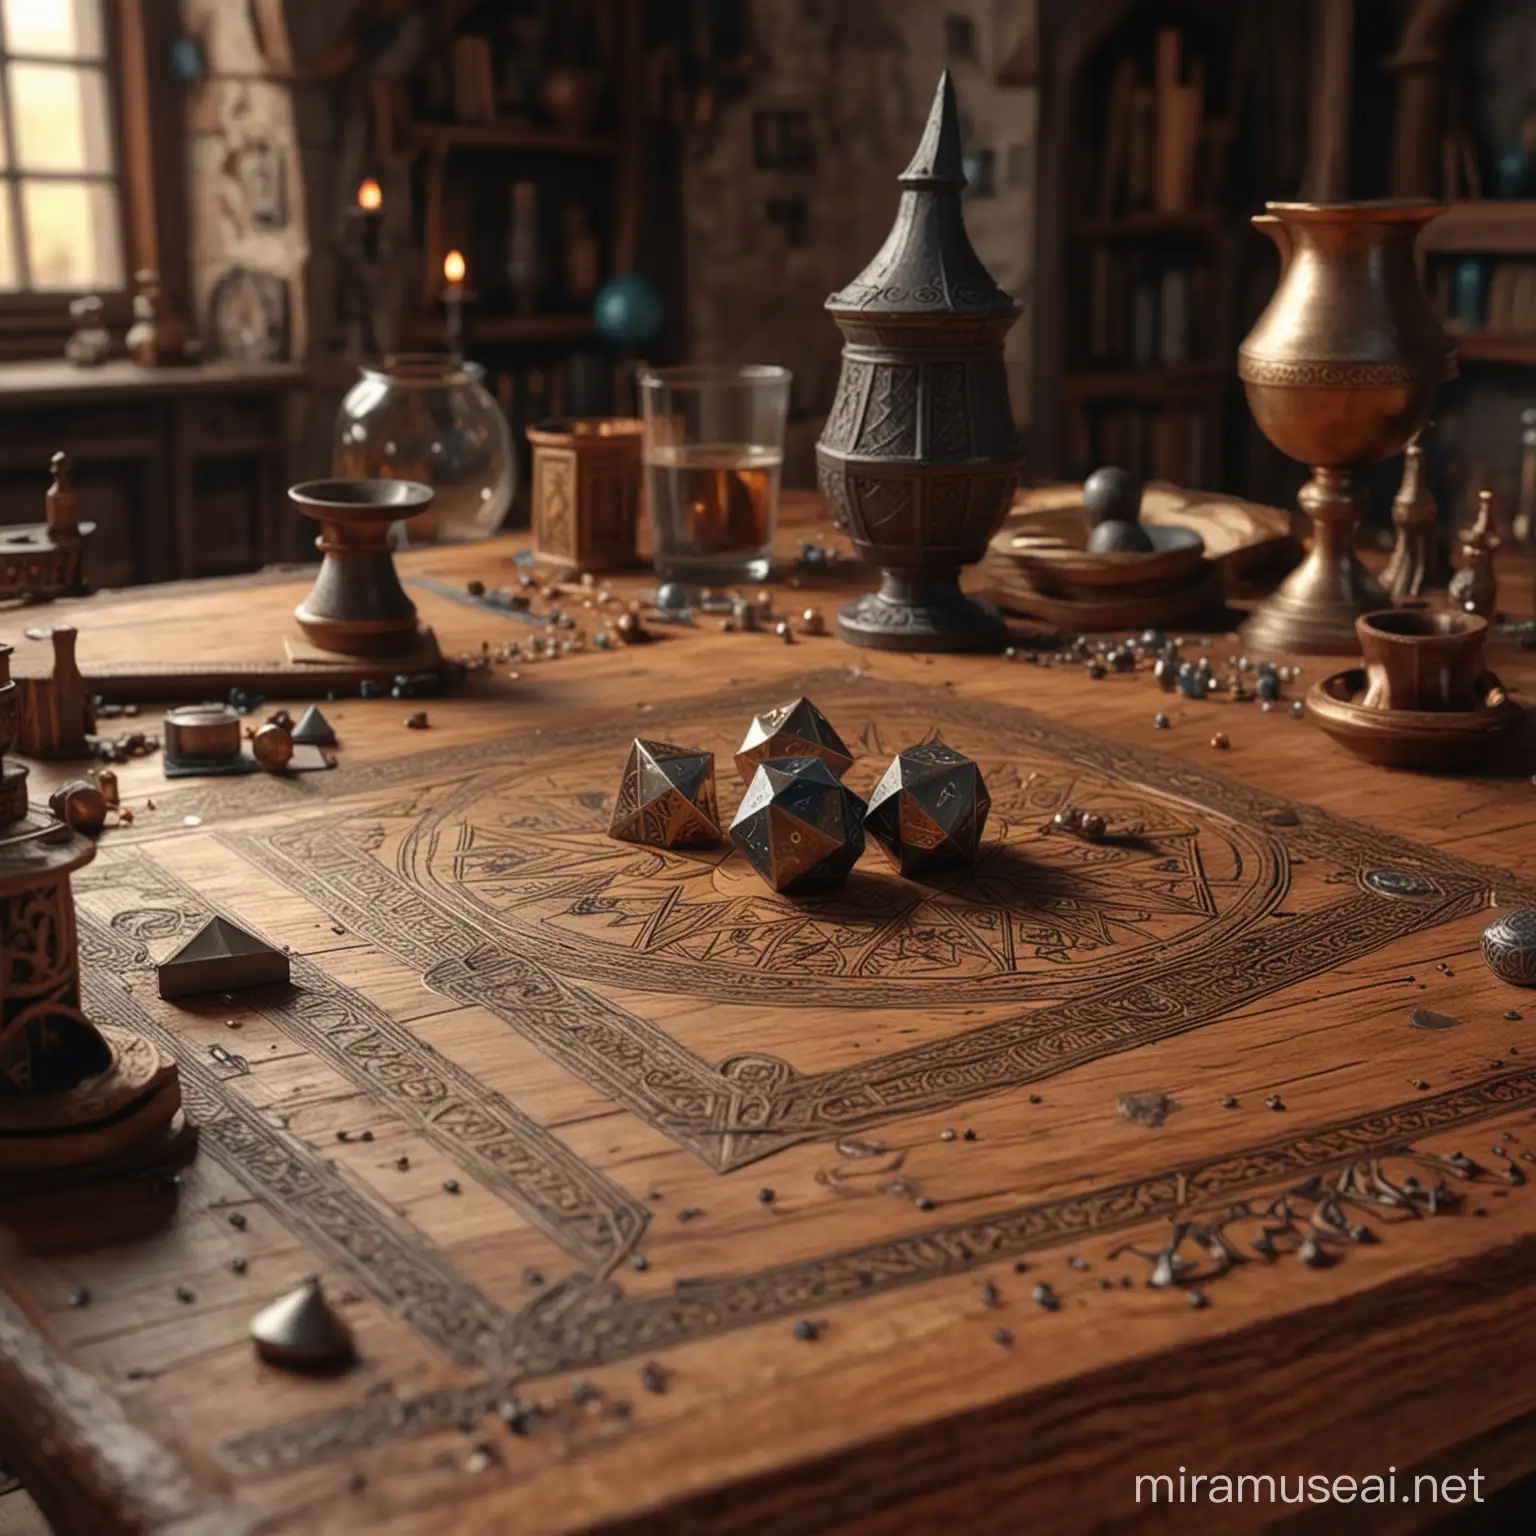 impossible geometric shapes from the fourth dimension, deception of vision, perspective, super realistic 4k photo, f/2.8 macro lens, medieval wizard's table, (cozy), the Middle Ages.